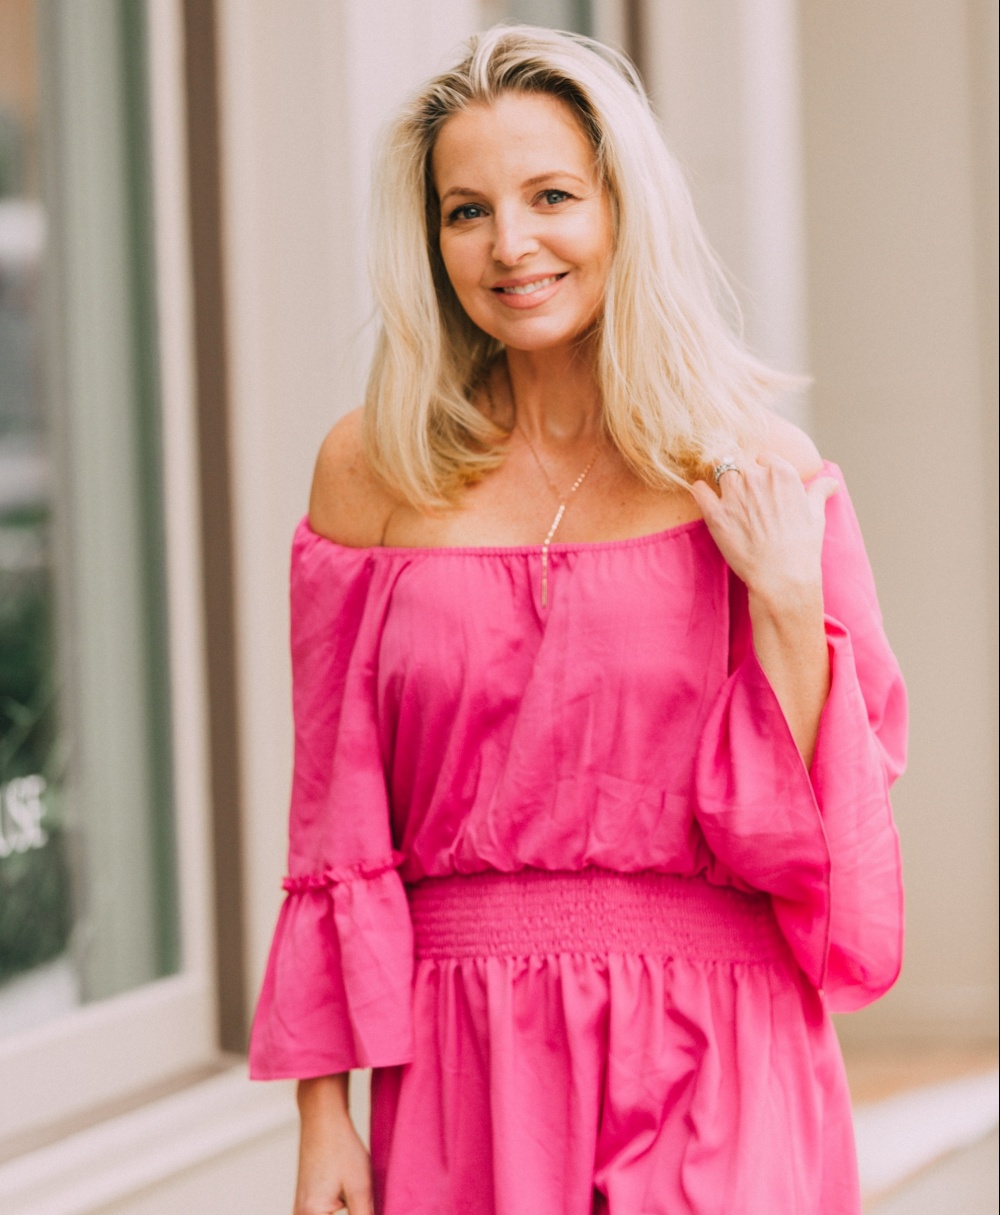 Spring fashion, pink Le Gali off the shoulder dress from Bloomingdale's worn by fashion blogger over 40, erin busbee of busbeestyle.com